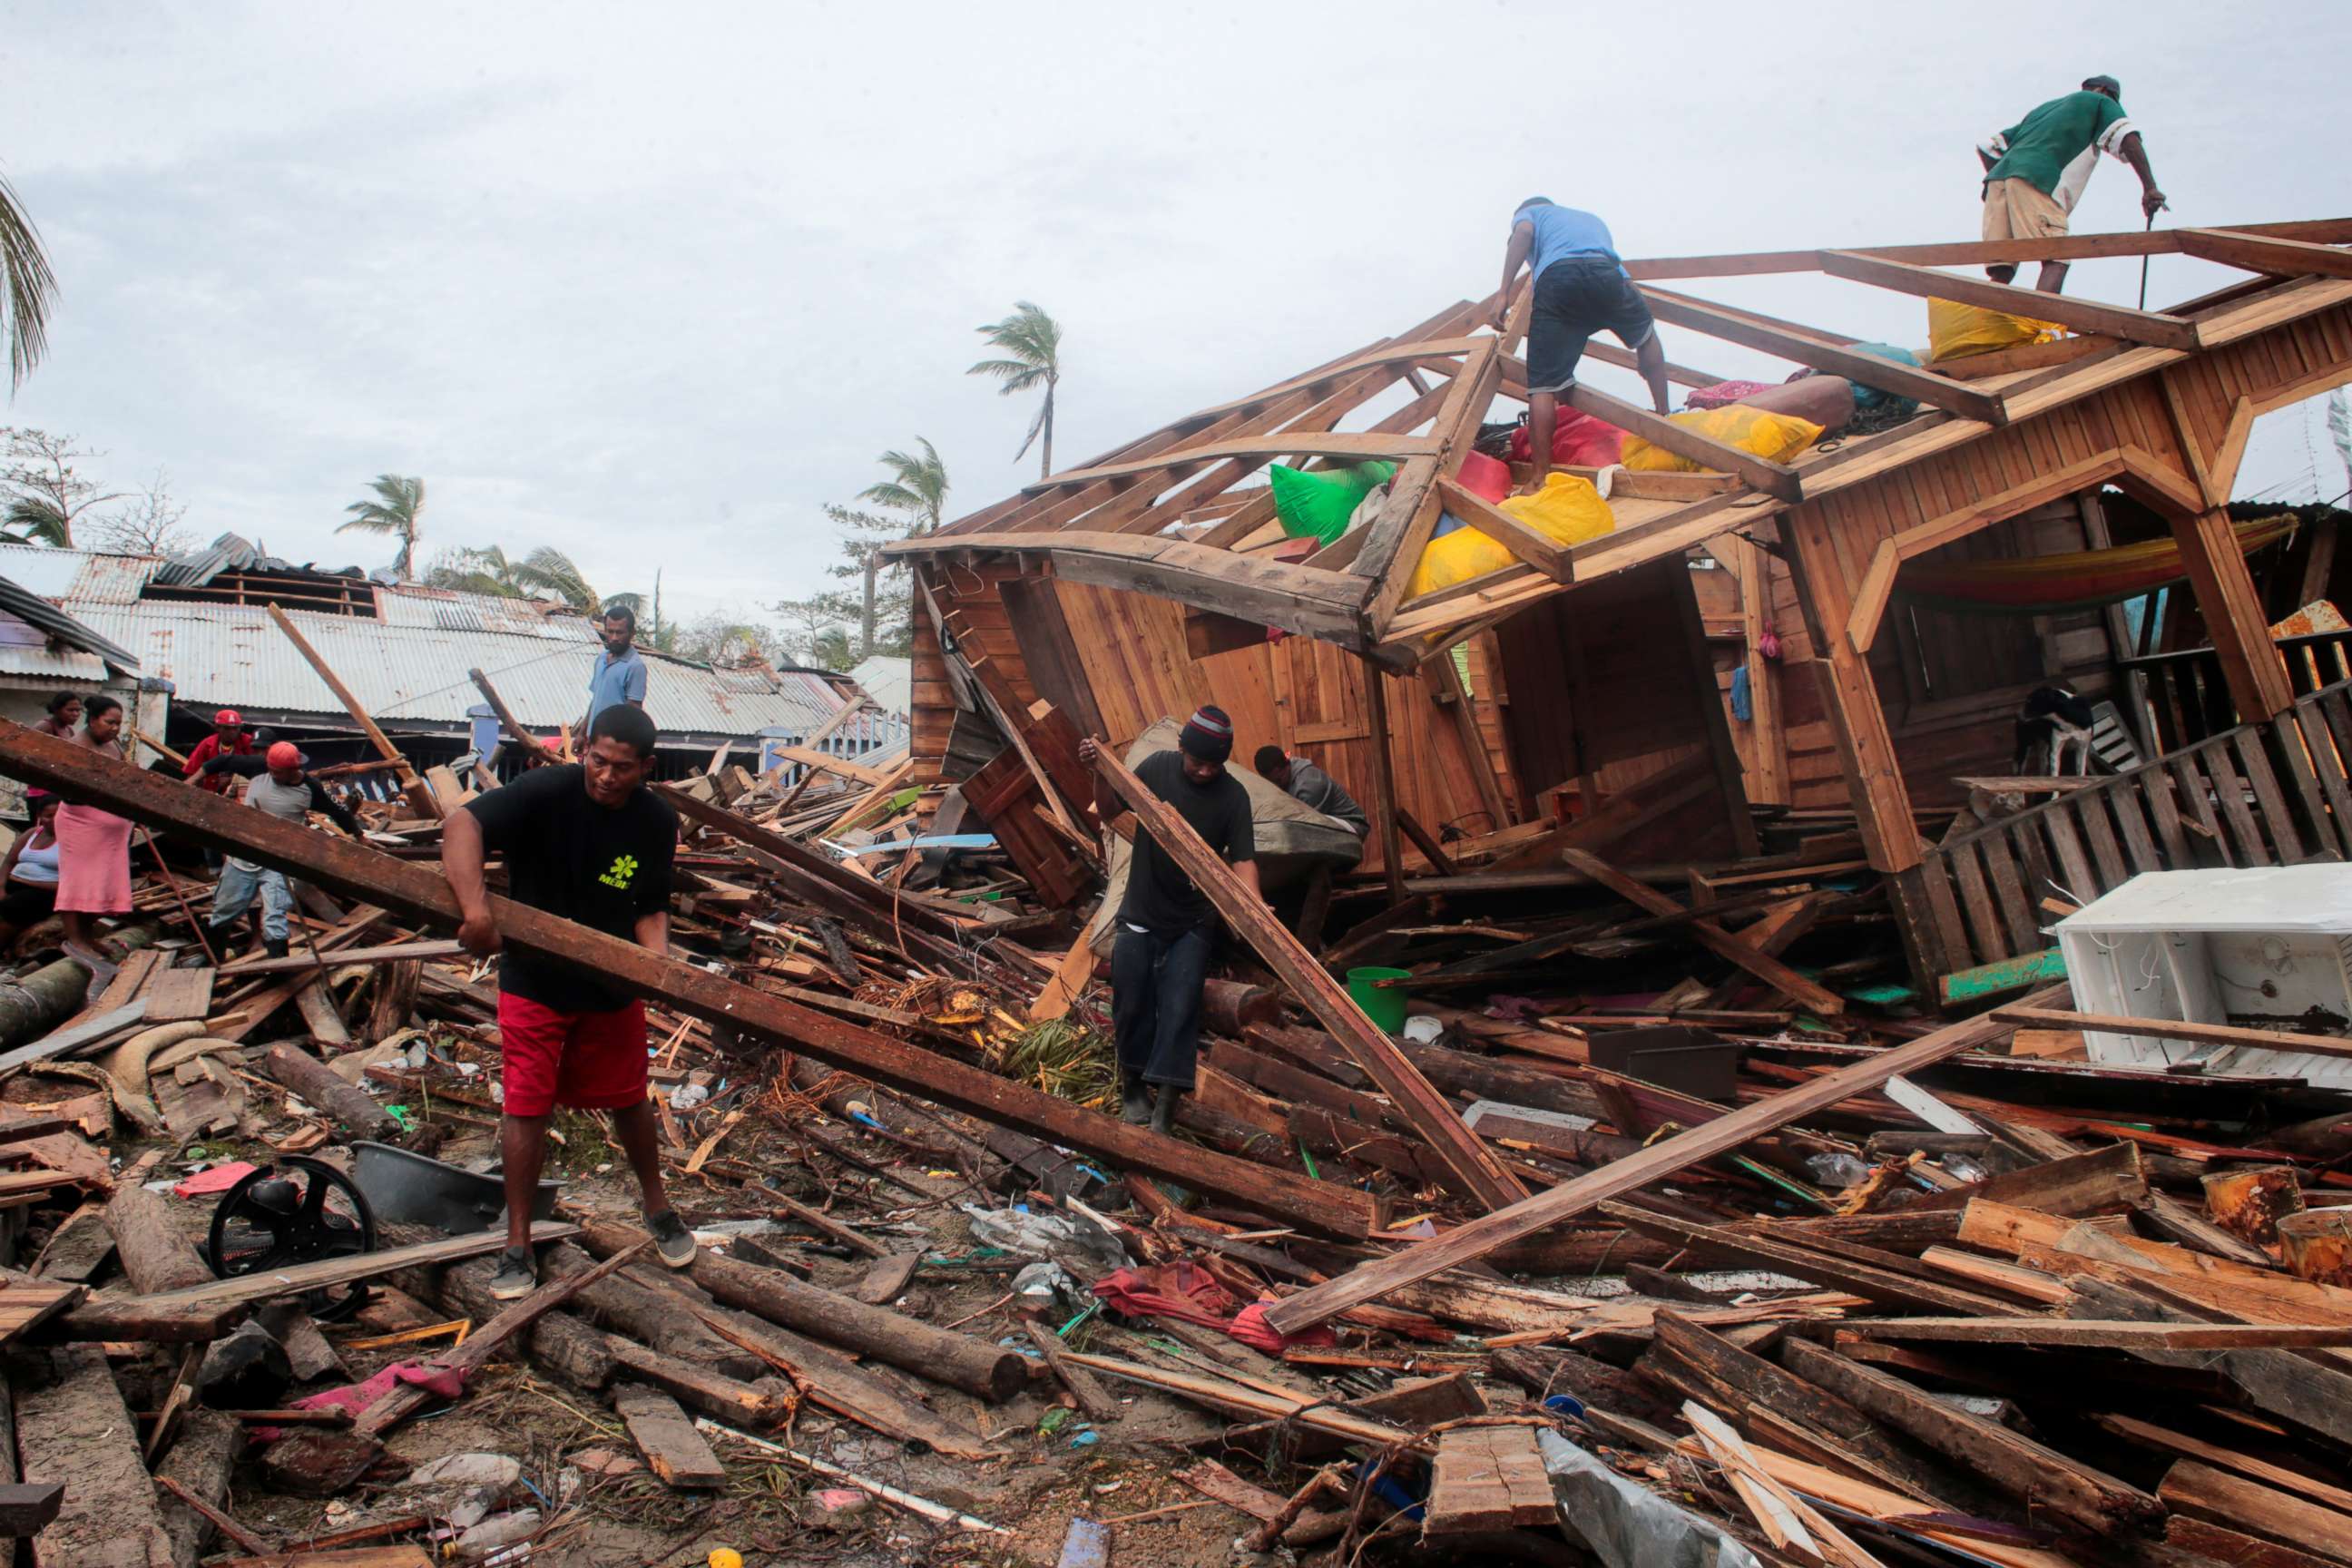 PHOTO: Residents remove debris from their houses destroyed by the passing of Hurricane Iota, in Puerto Cabezas, Nicaragua, Nov. 18, 2020.